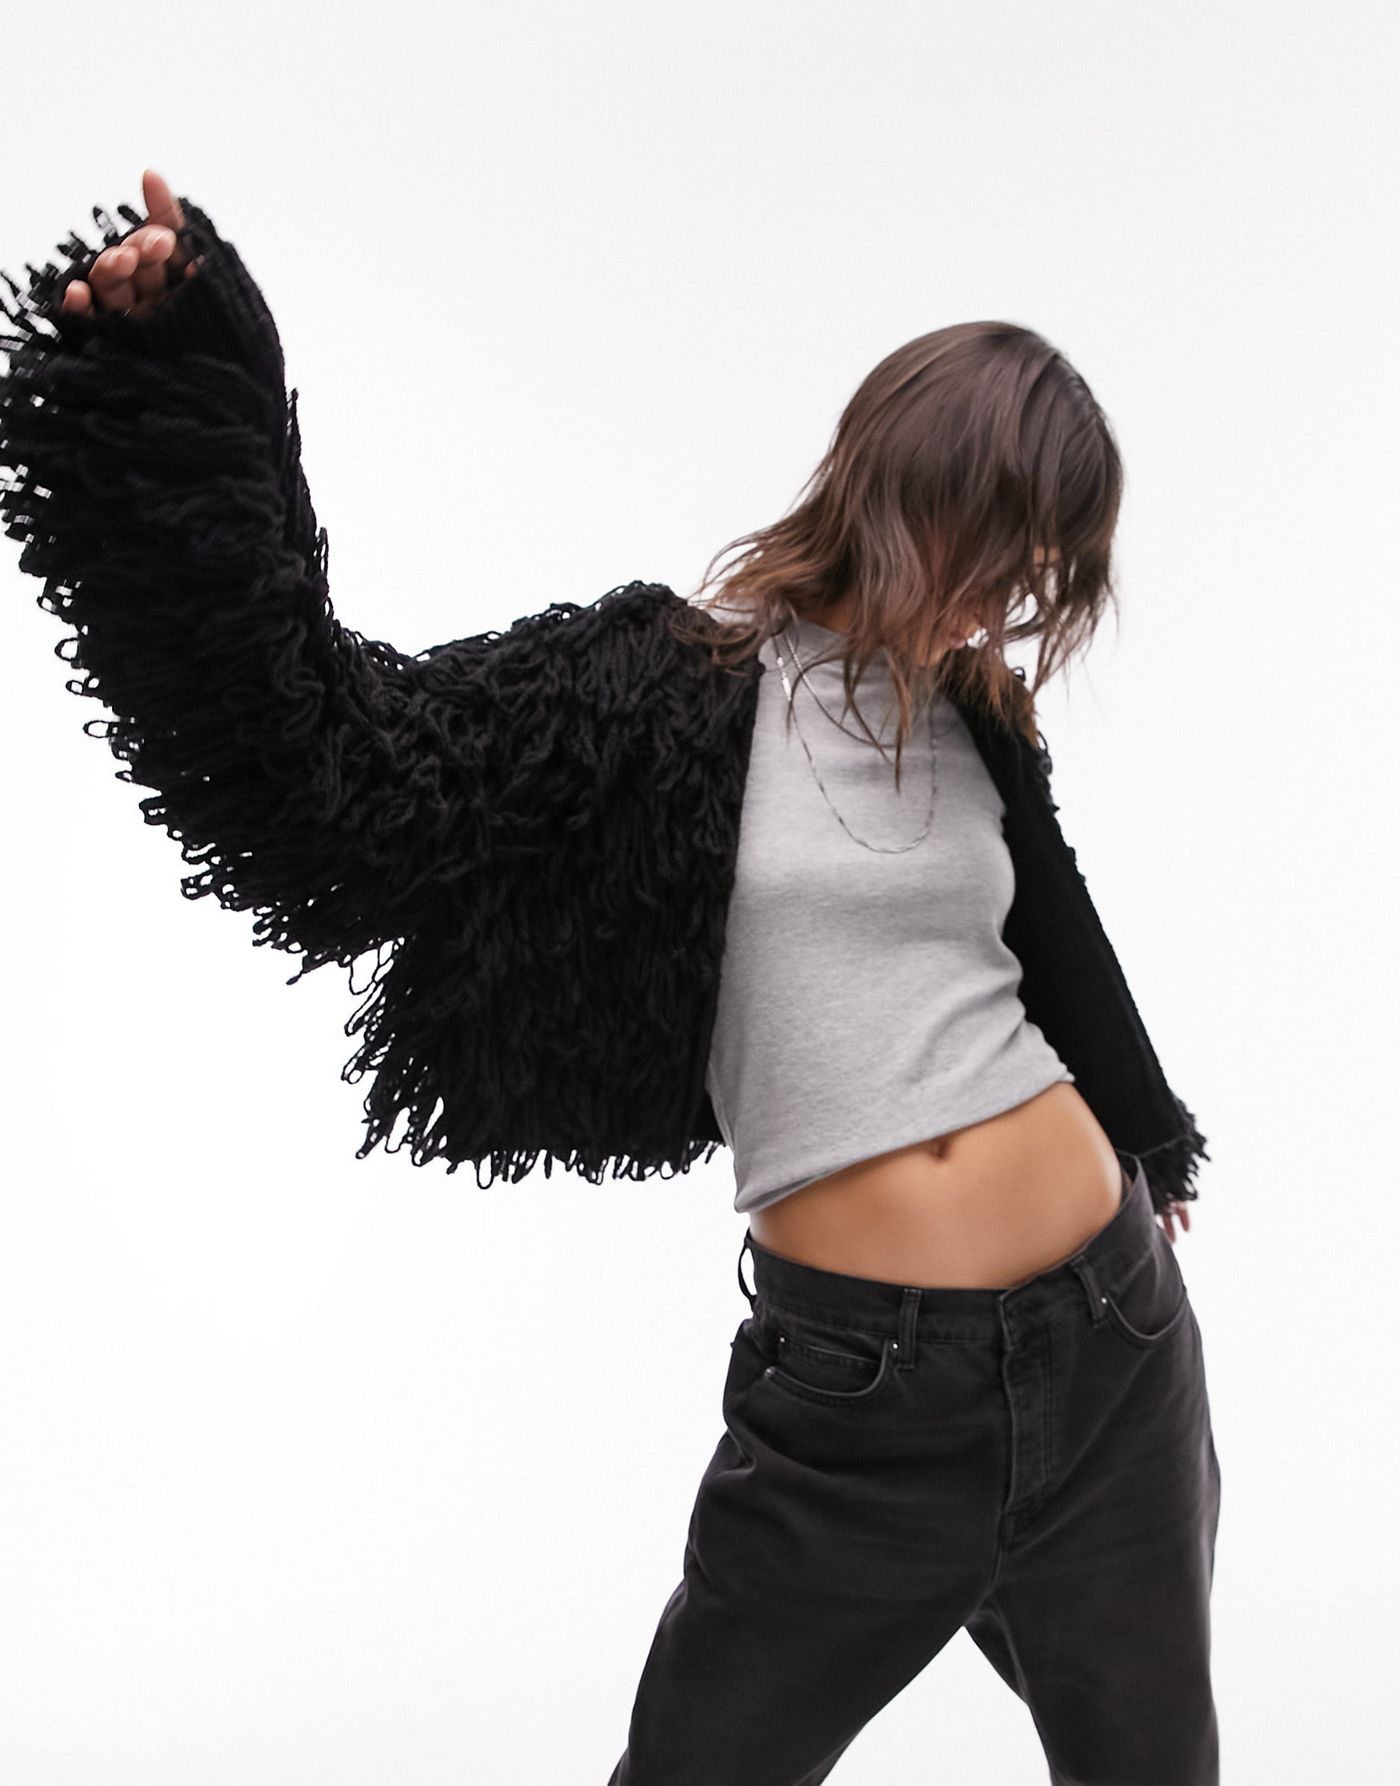 Topshop knitted shaggy cardigan in black